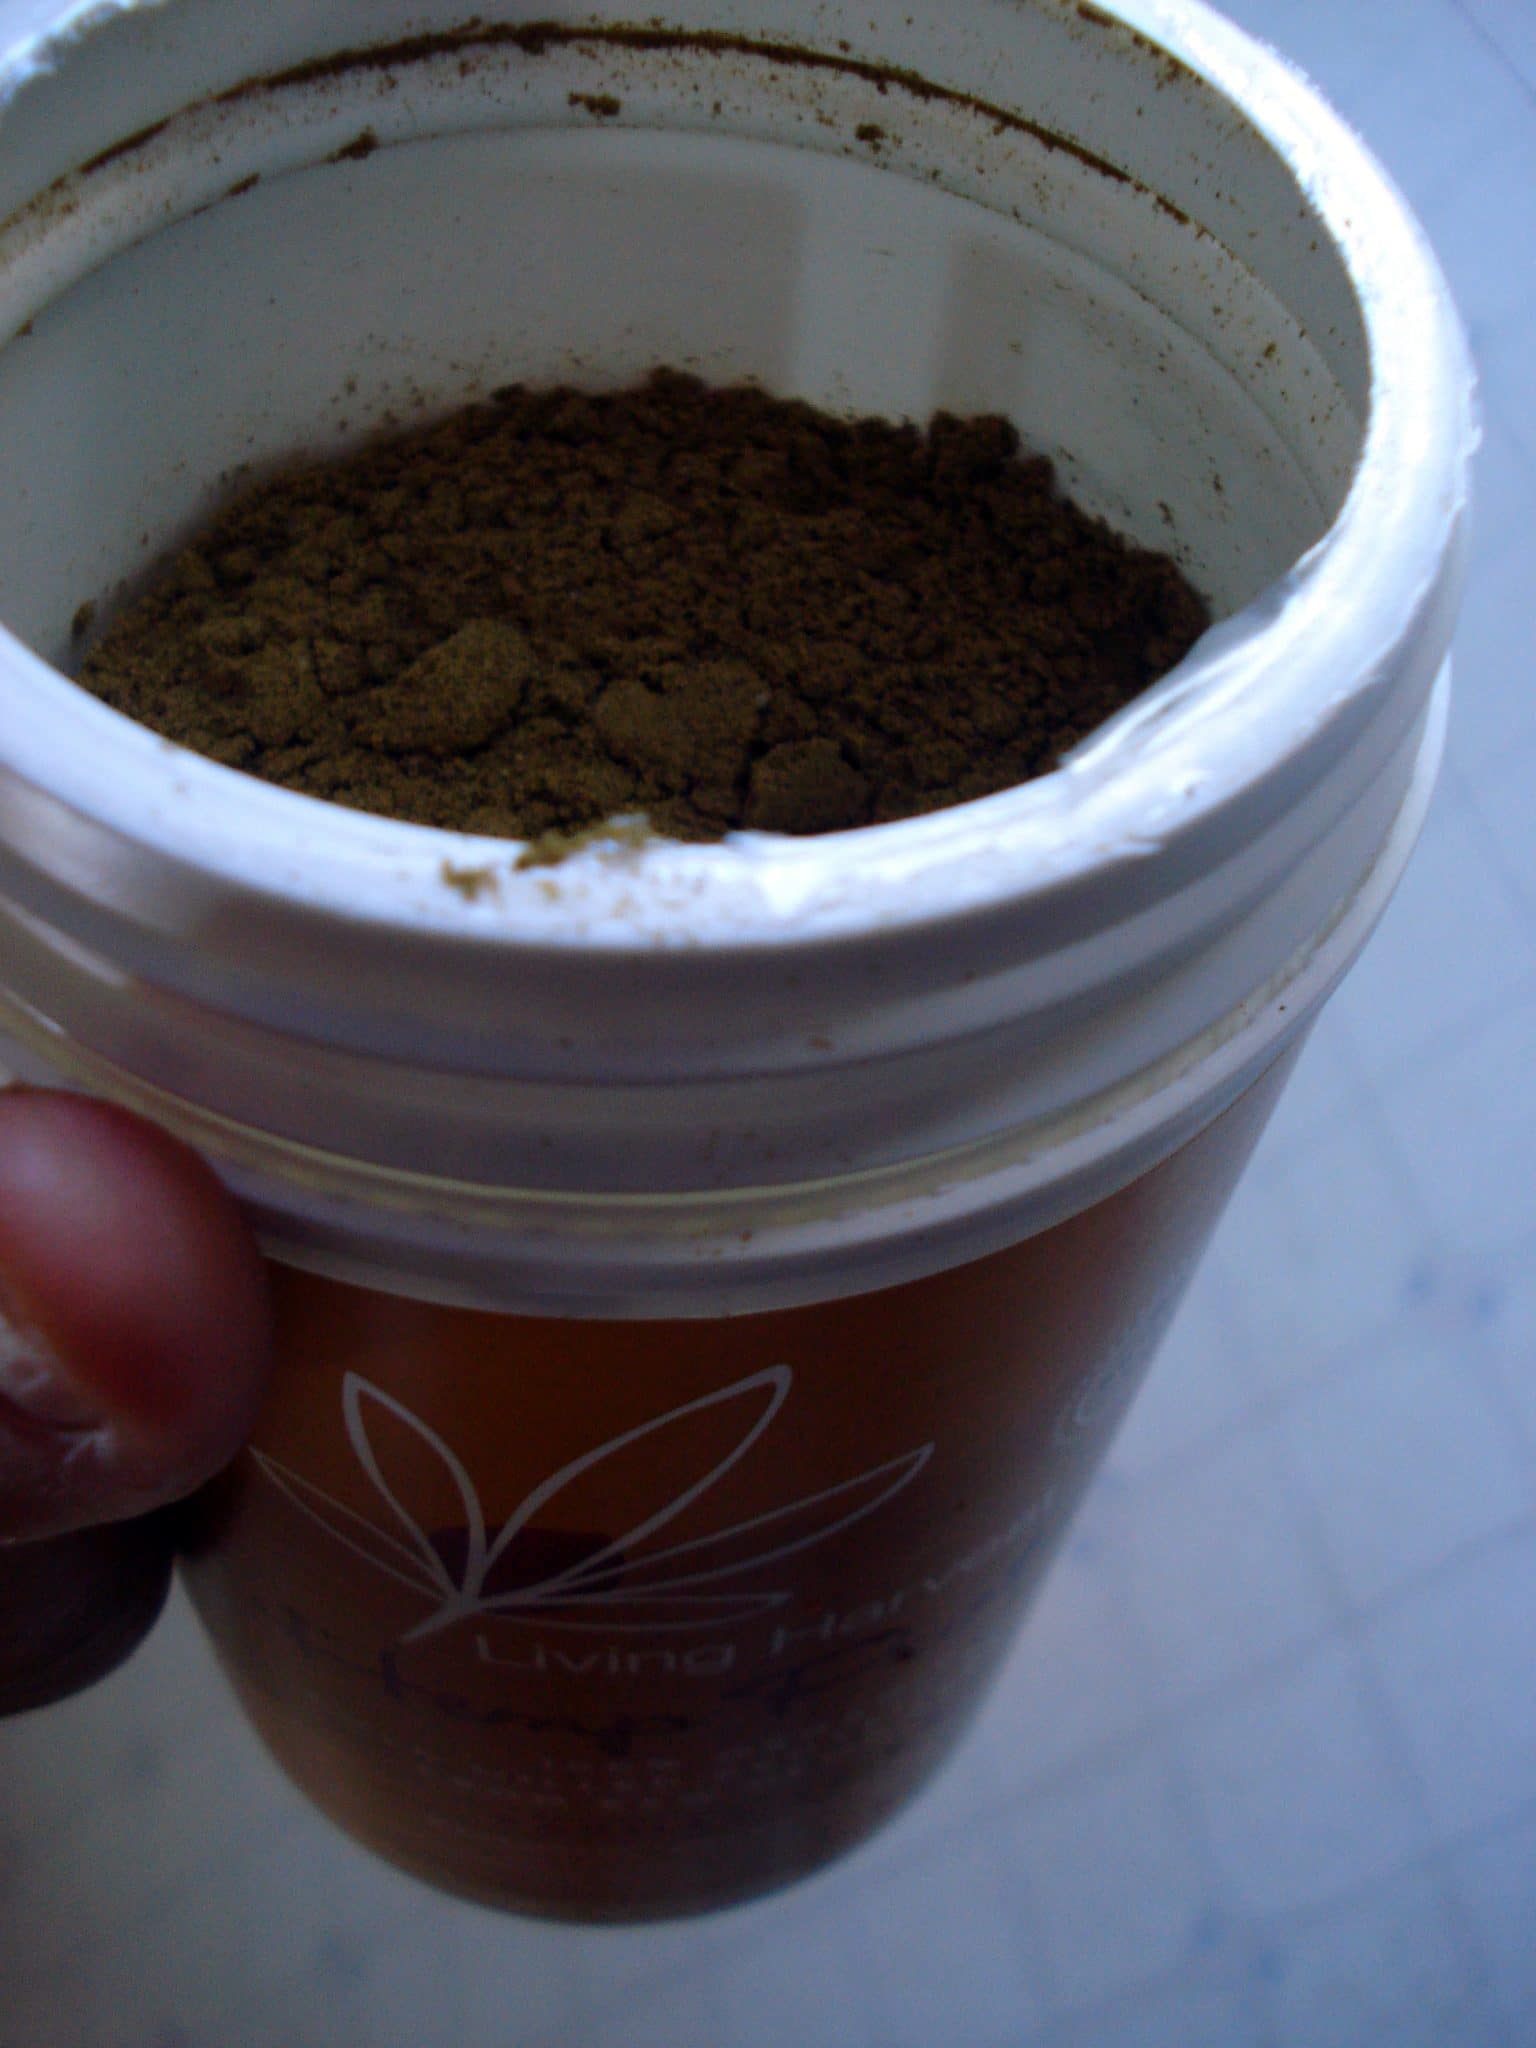 Oen canister view of Organic Hemp Protein Powder